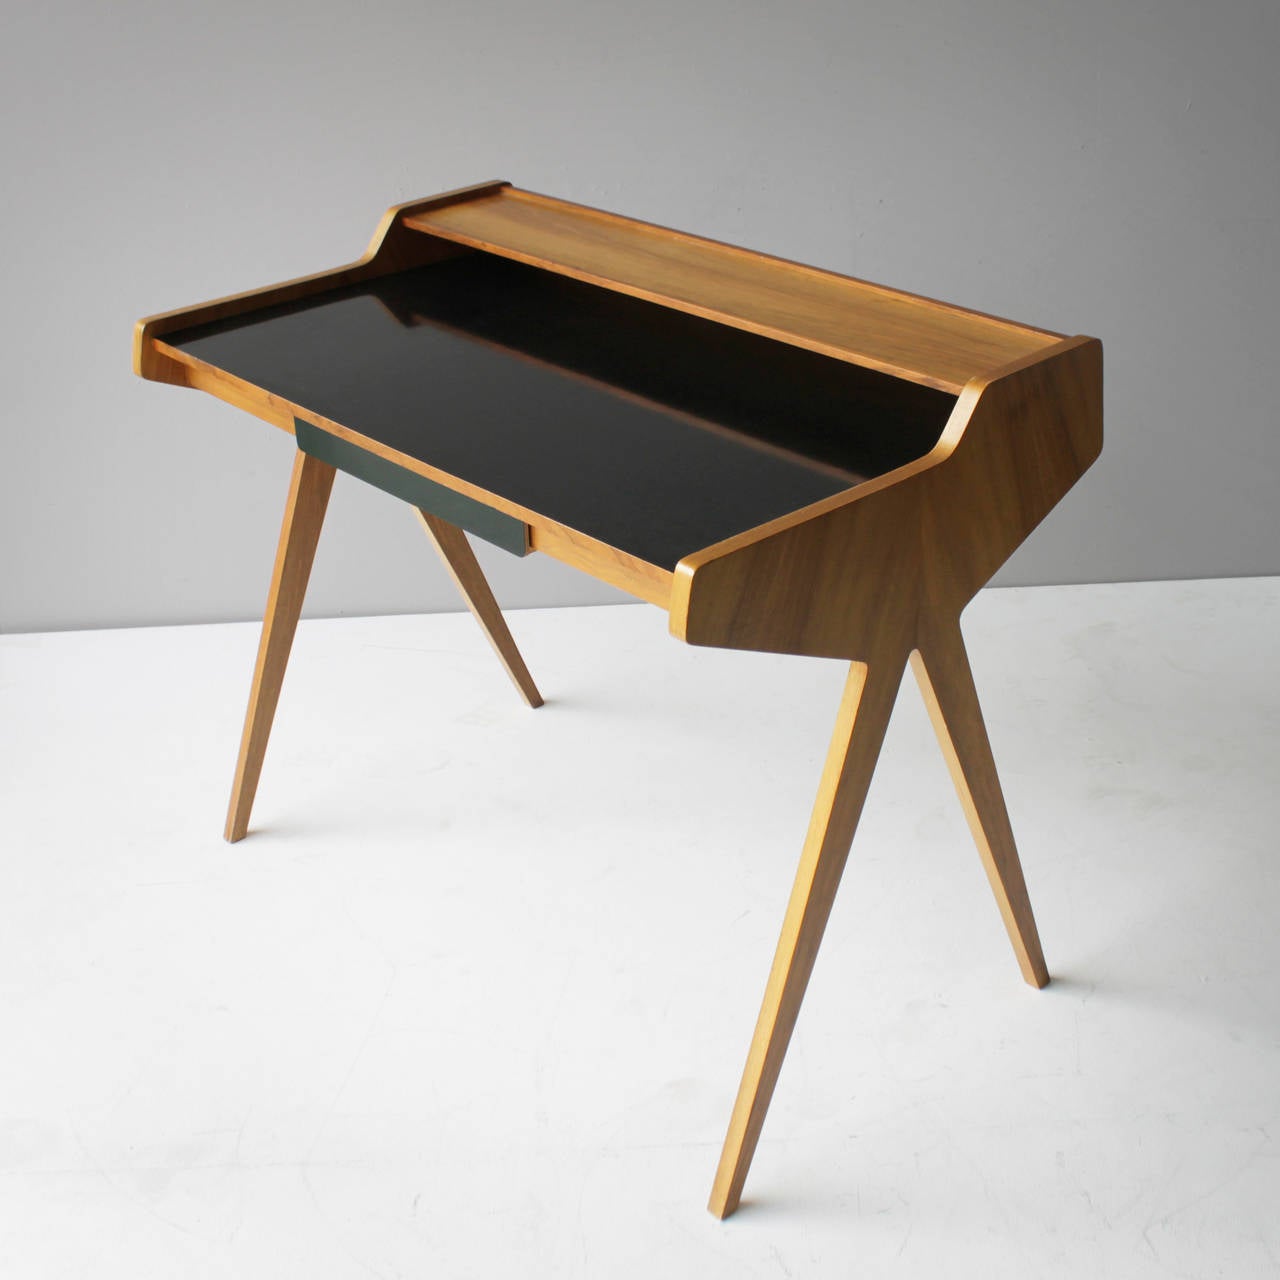 Rare ladies desk, designed by the German architect Helmut Magg. Beautiful organic formed writing desk in black formica veneer and walnut with one drawer. 
Good condition. Some minor scratches at the back and wear of age on the black top (see